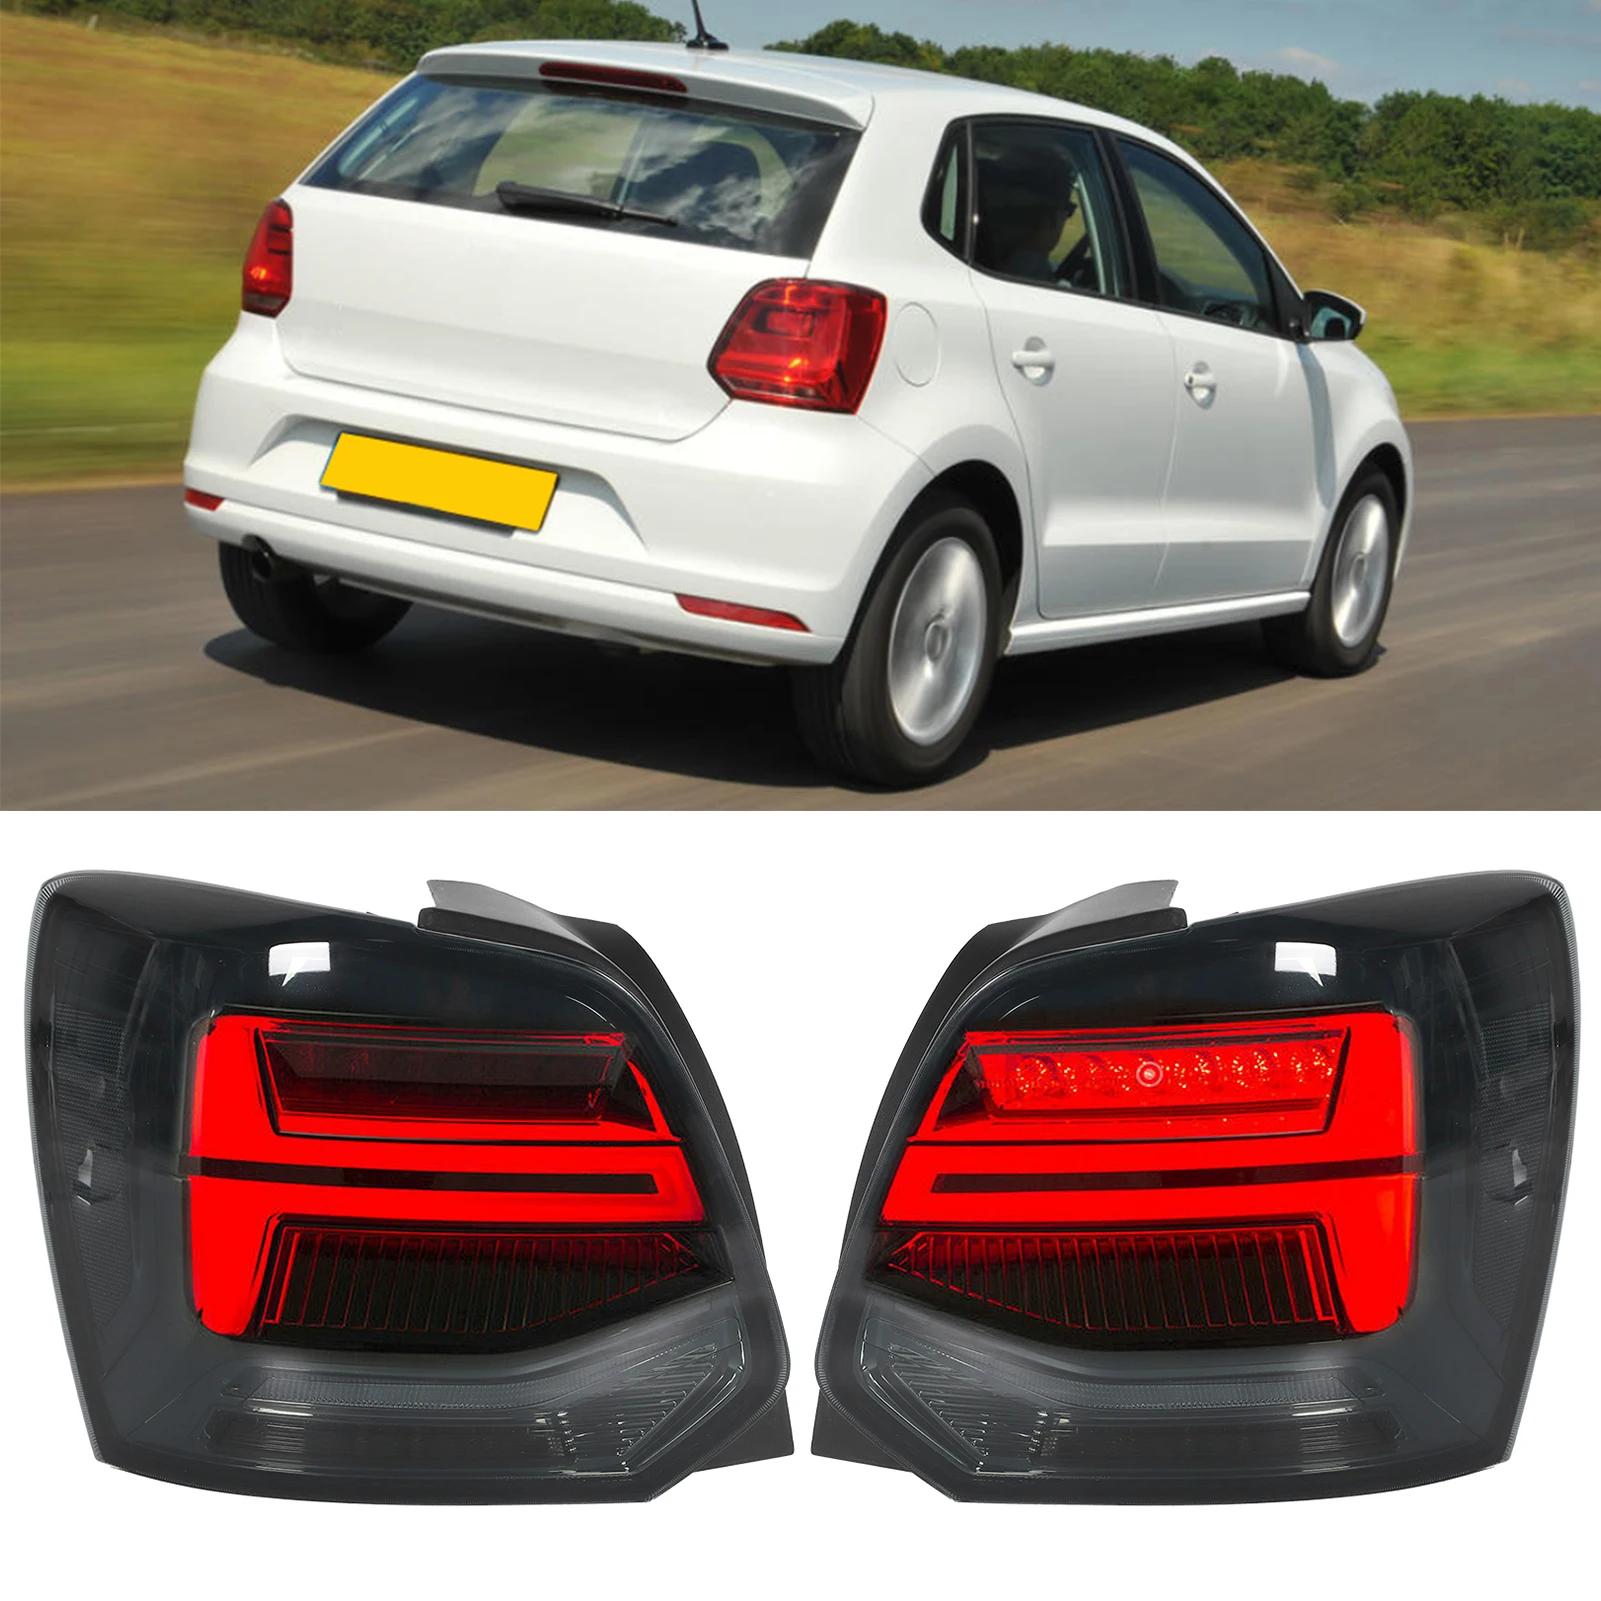 polo smoked rear lights - Does VW Polo have LED headlights